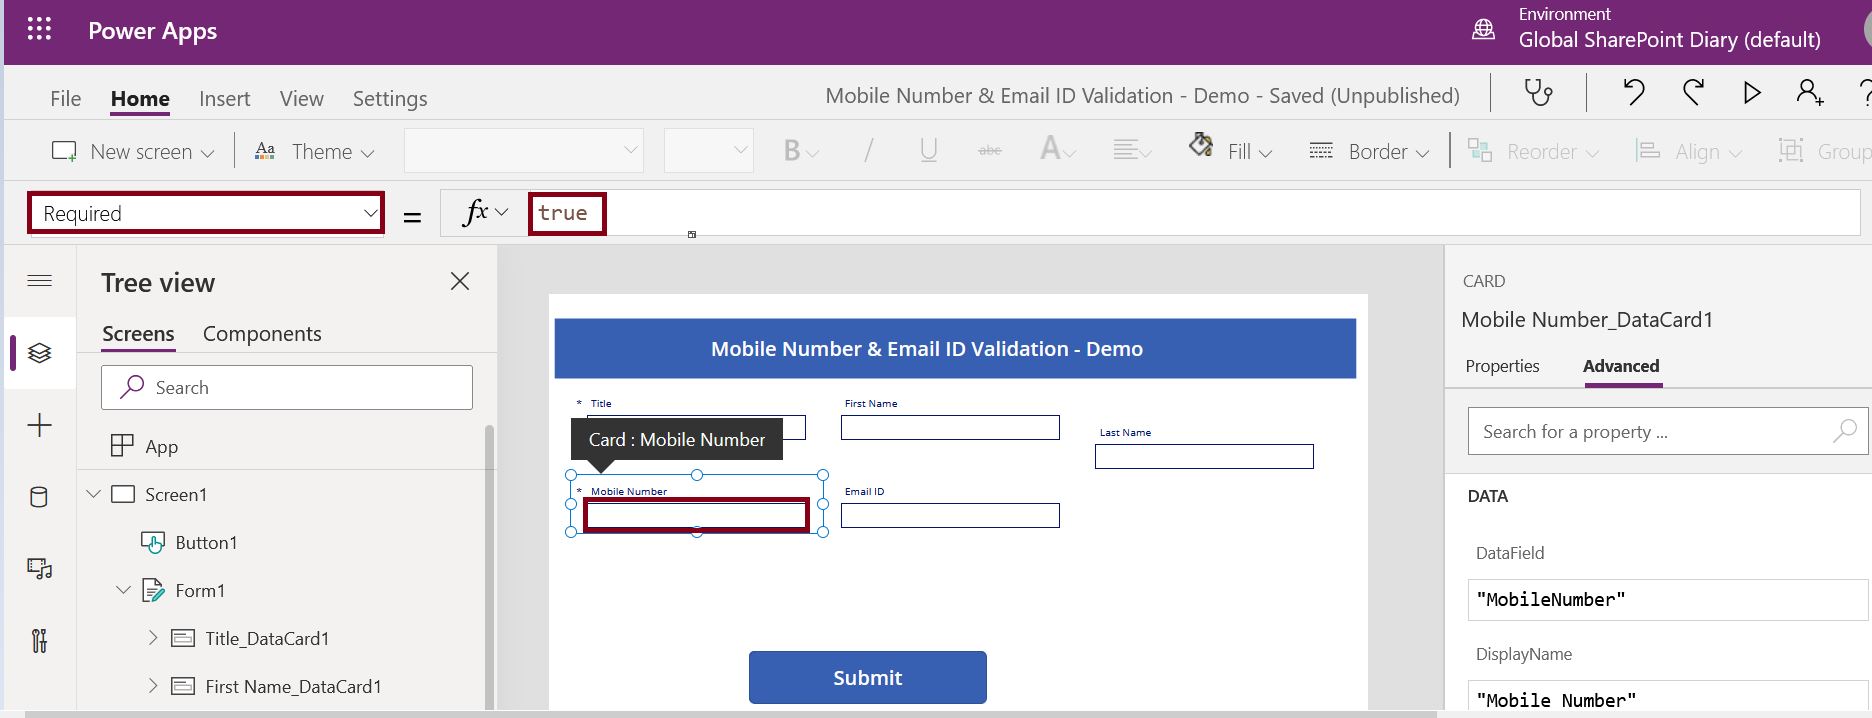 How to make PowerApps field property as required?